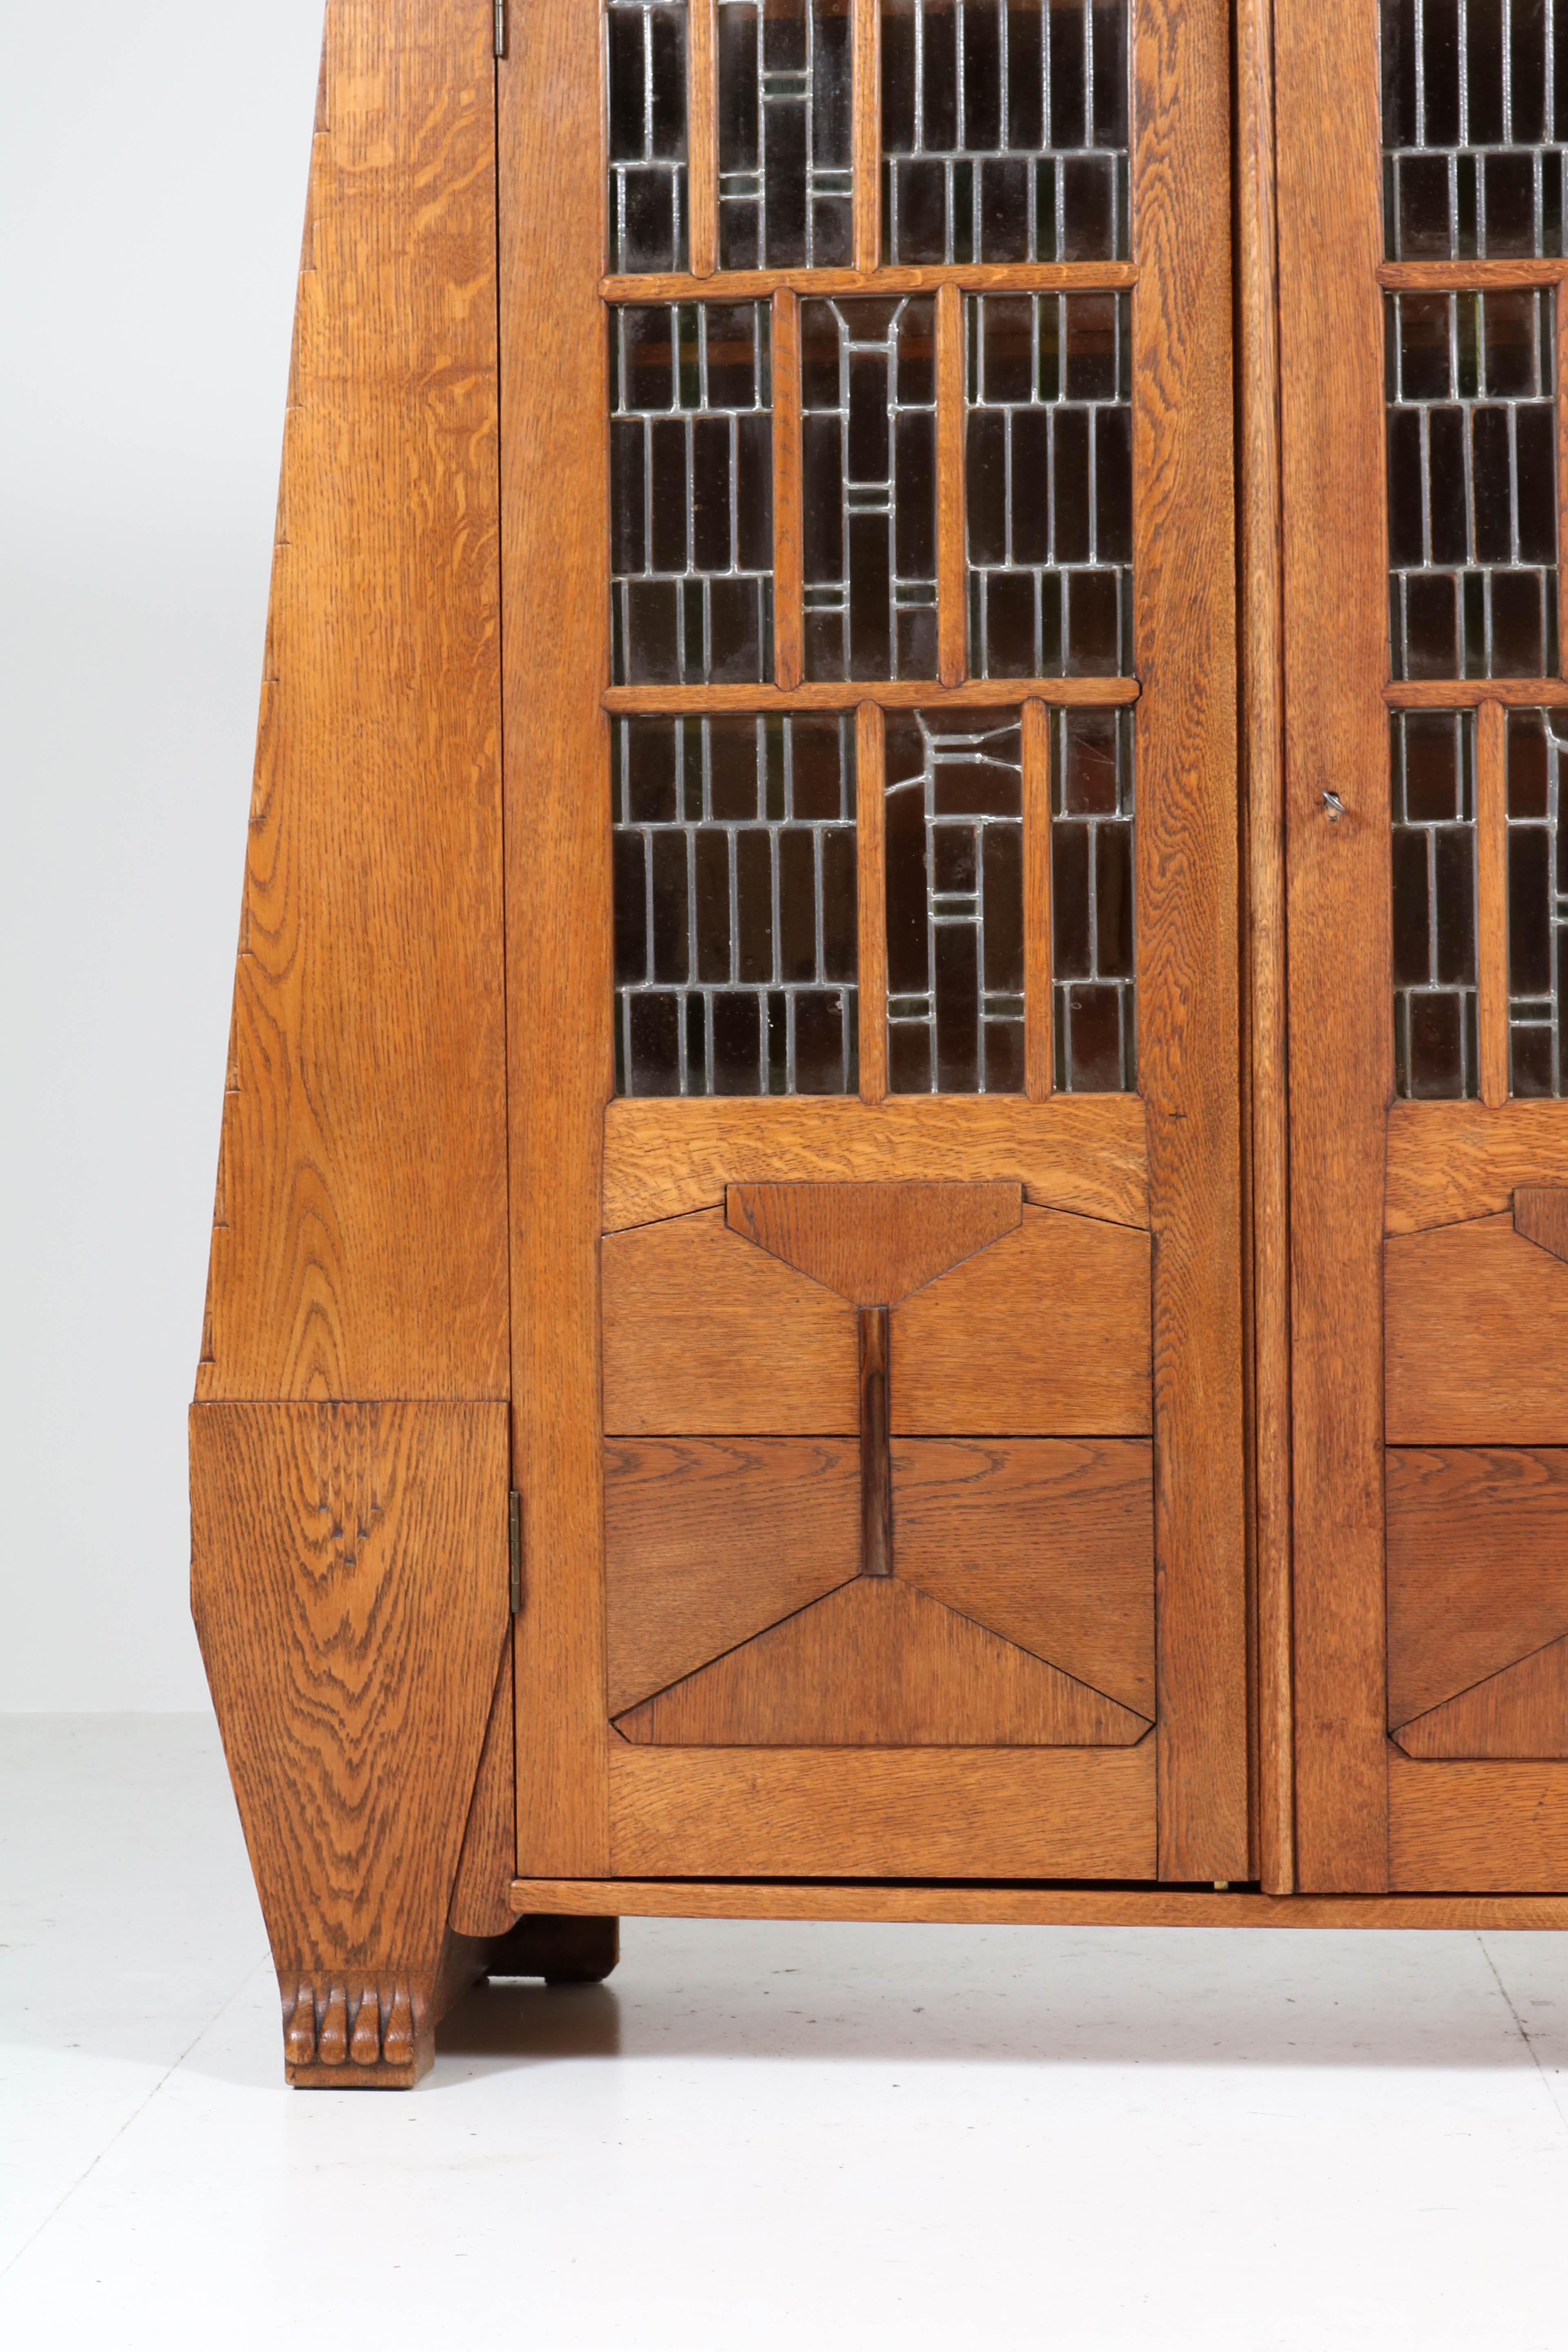 Magnificent and very rare Art Deco Amsterdam School bookcase.
Design by Hildo Krop.
Striking Dutch design from circa 1918.
Solid oak and original oak veneer.
The stained glass is monogrammed with the letters P and M.
Hildo Krop designed